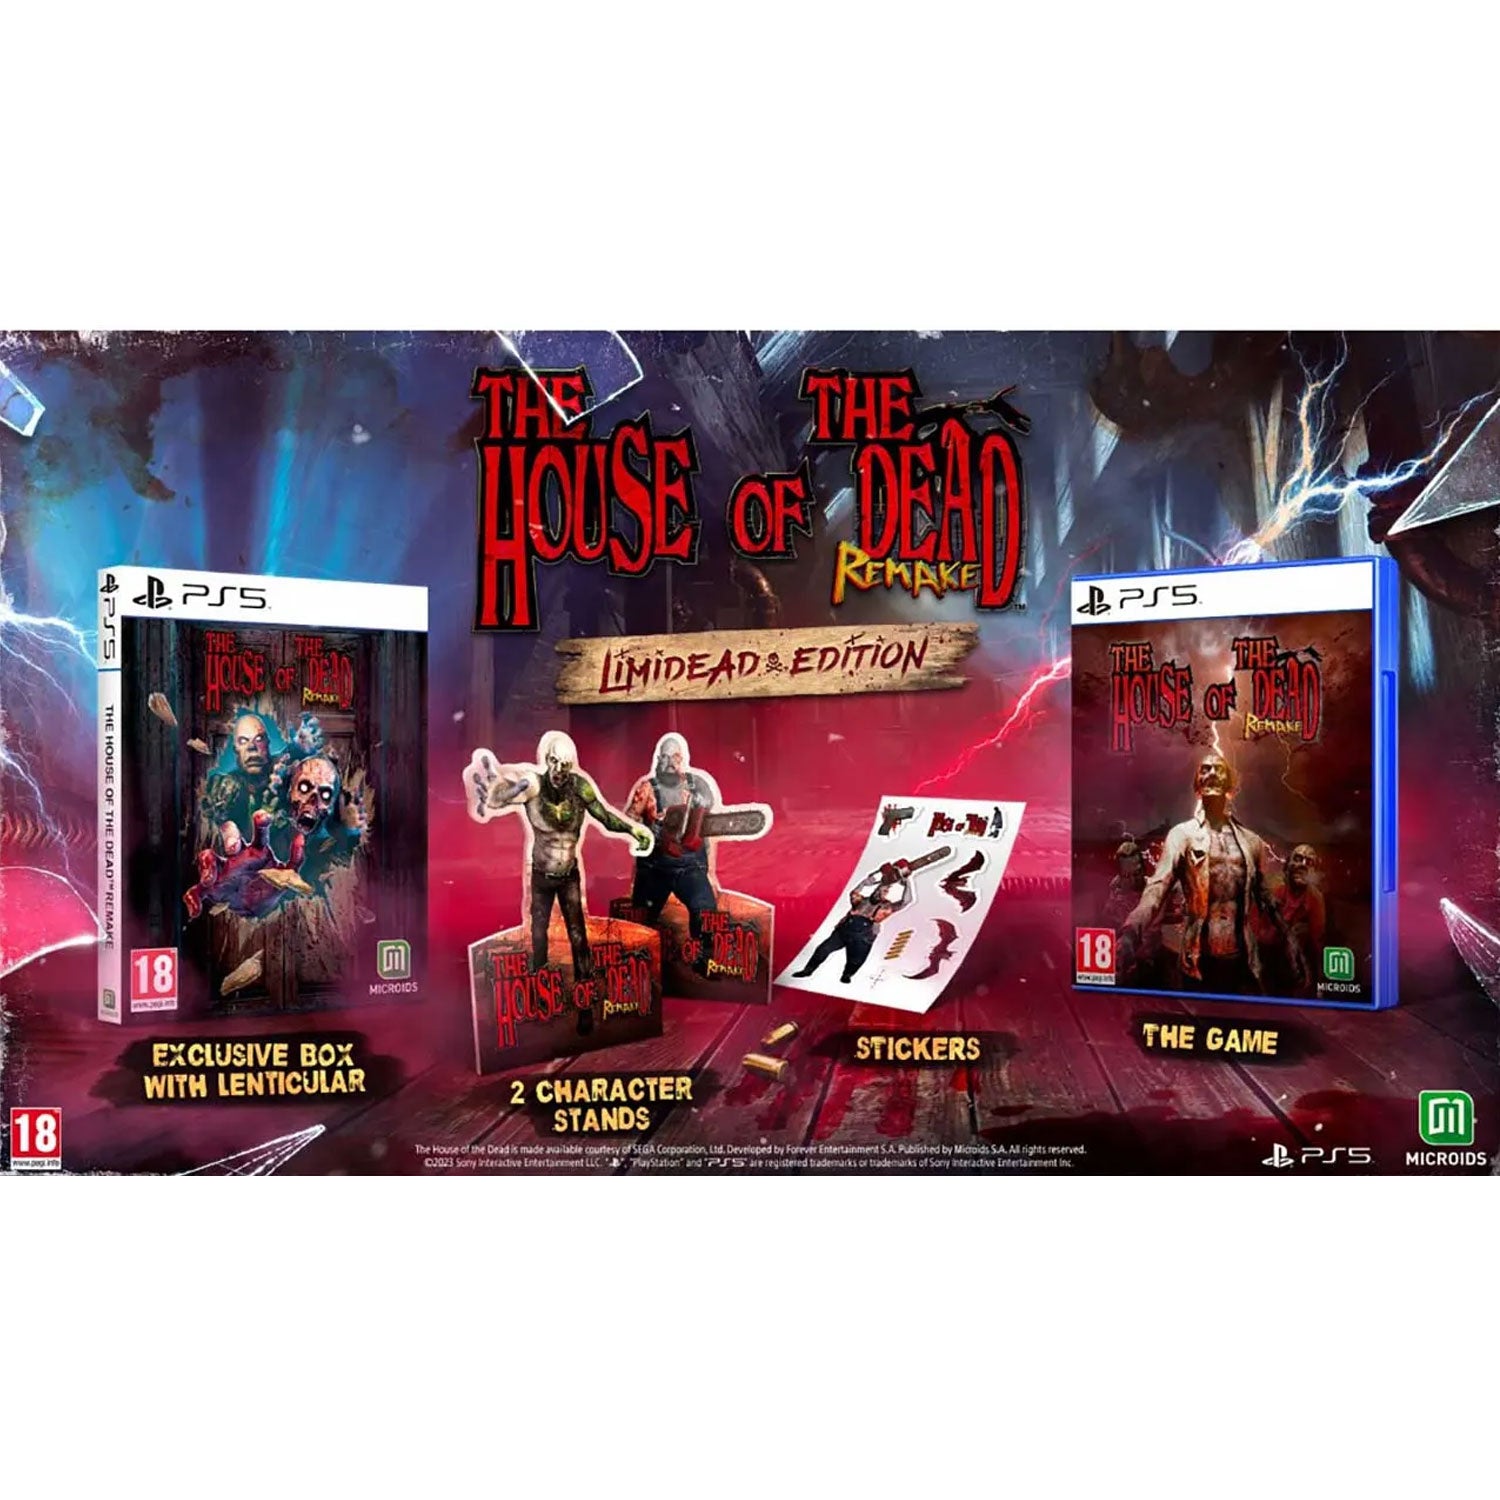 PS5 The House of The Dead Remake Limited Edition